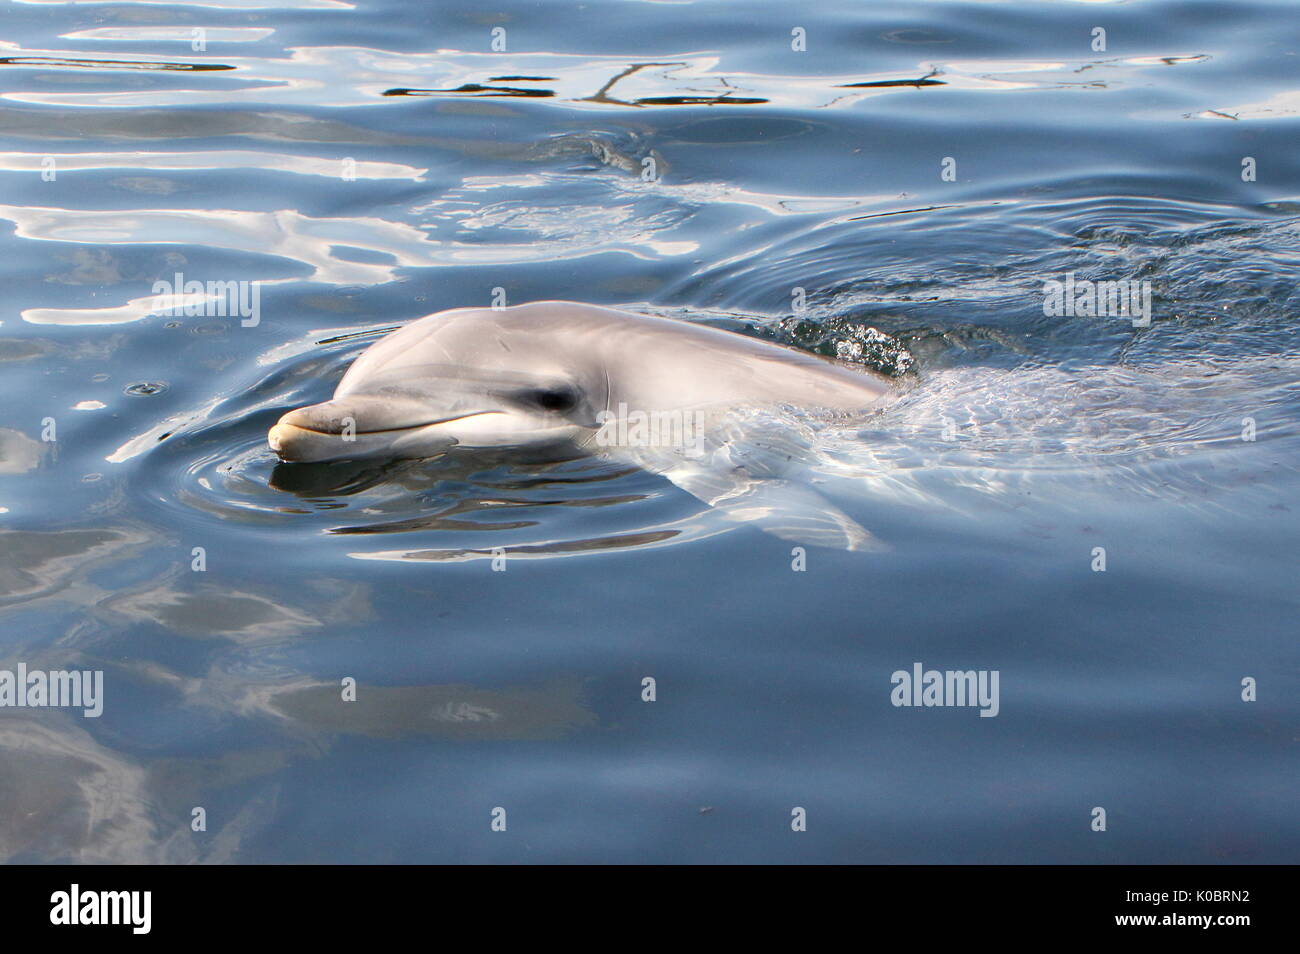 Atlantic Bottle-nose dolphin (Tursiops truncatus) surfacing, close up of the head. Stock Photo